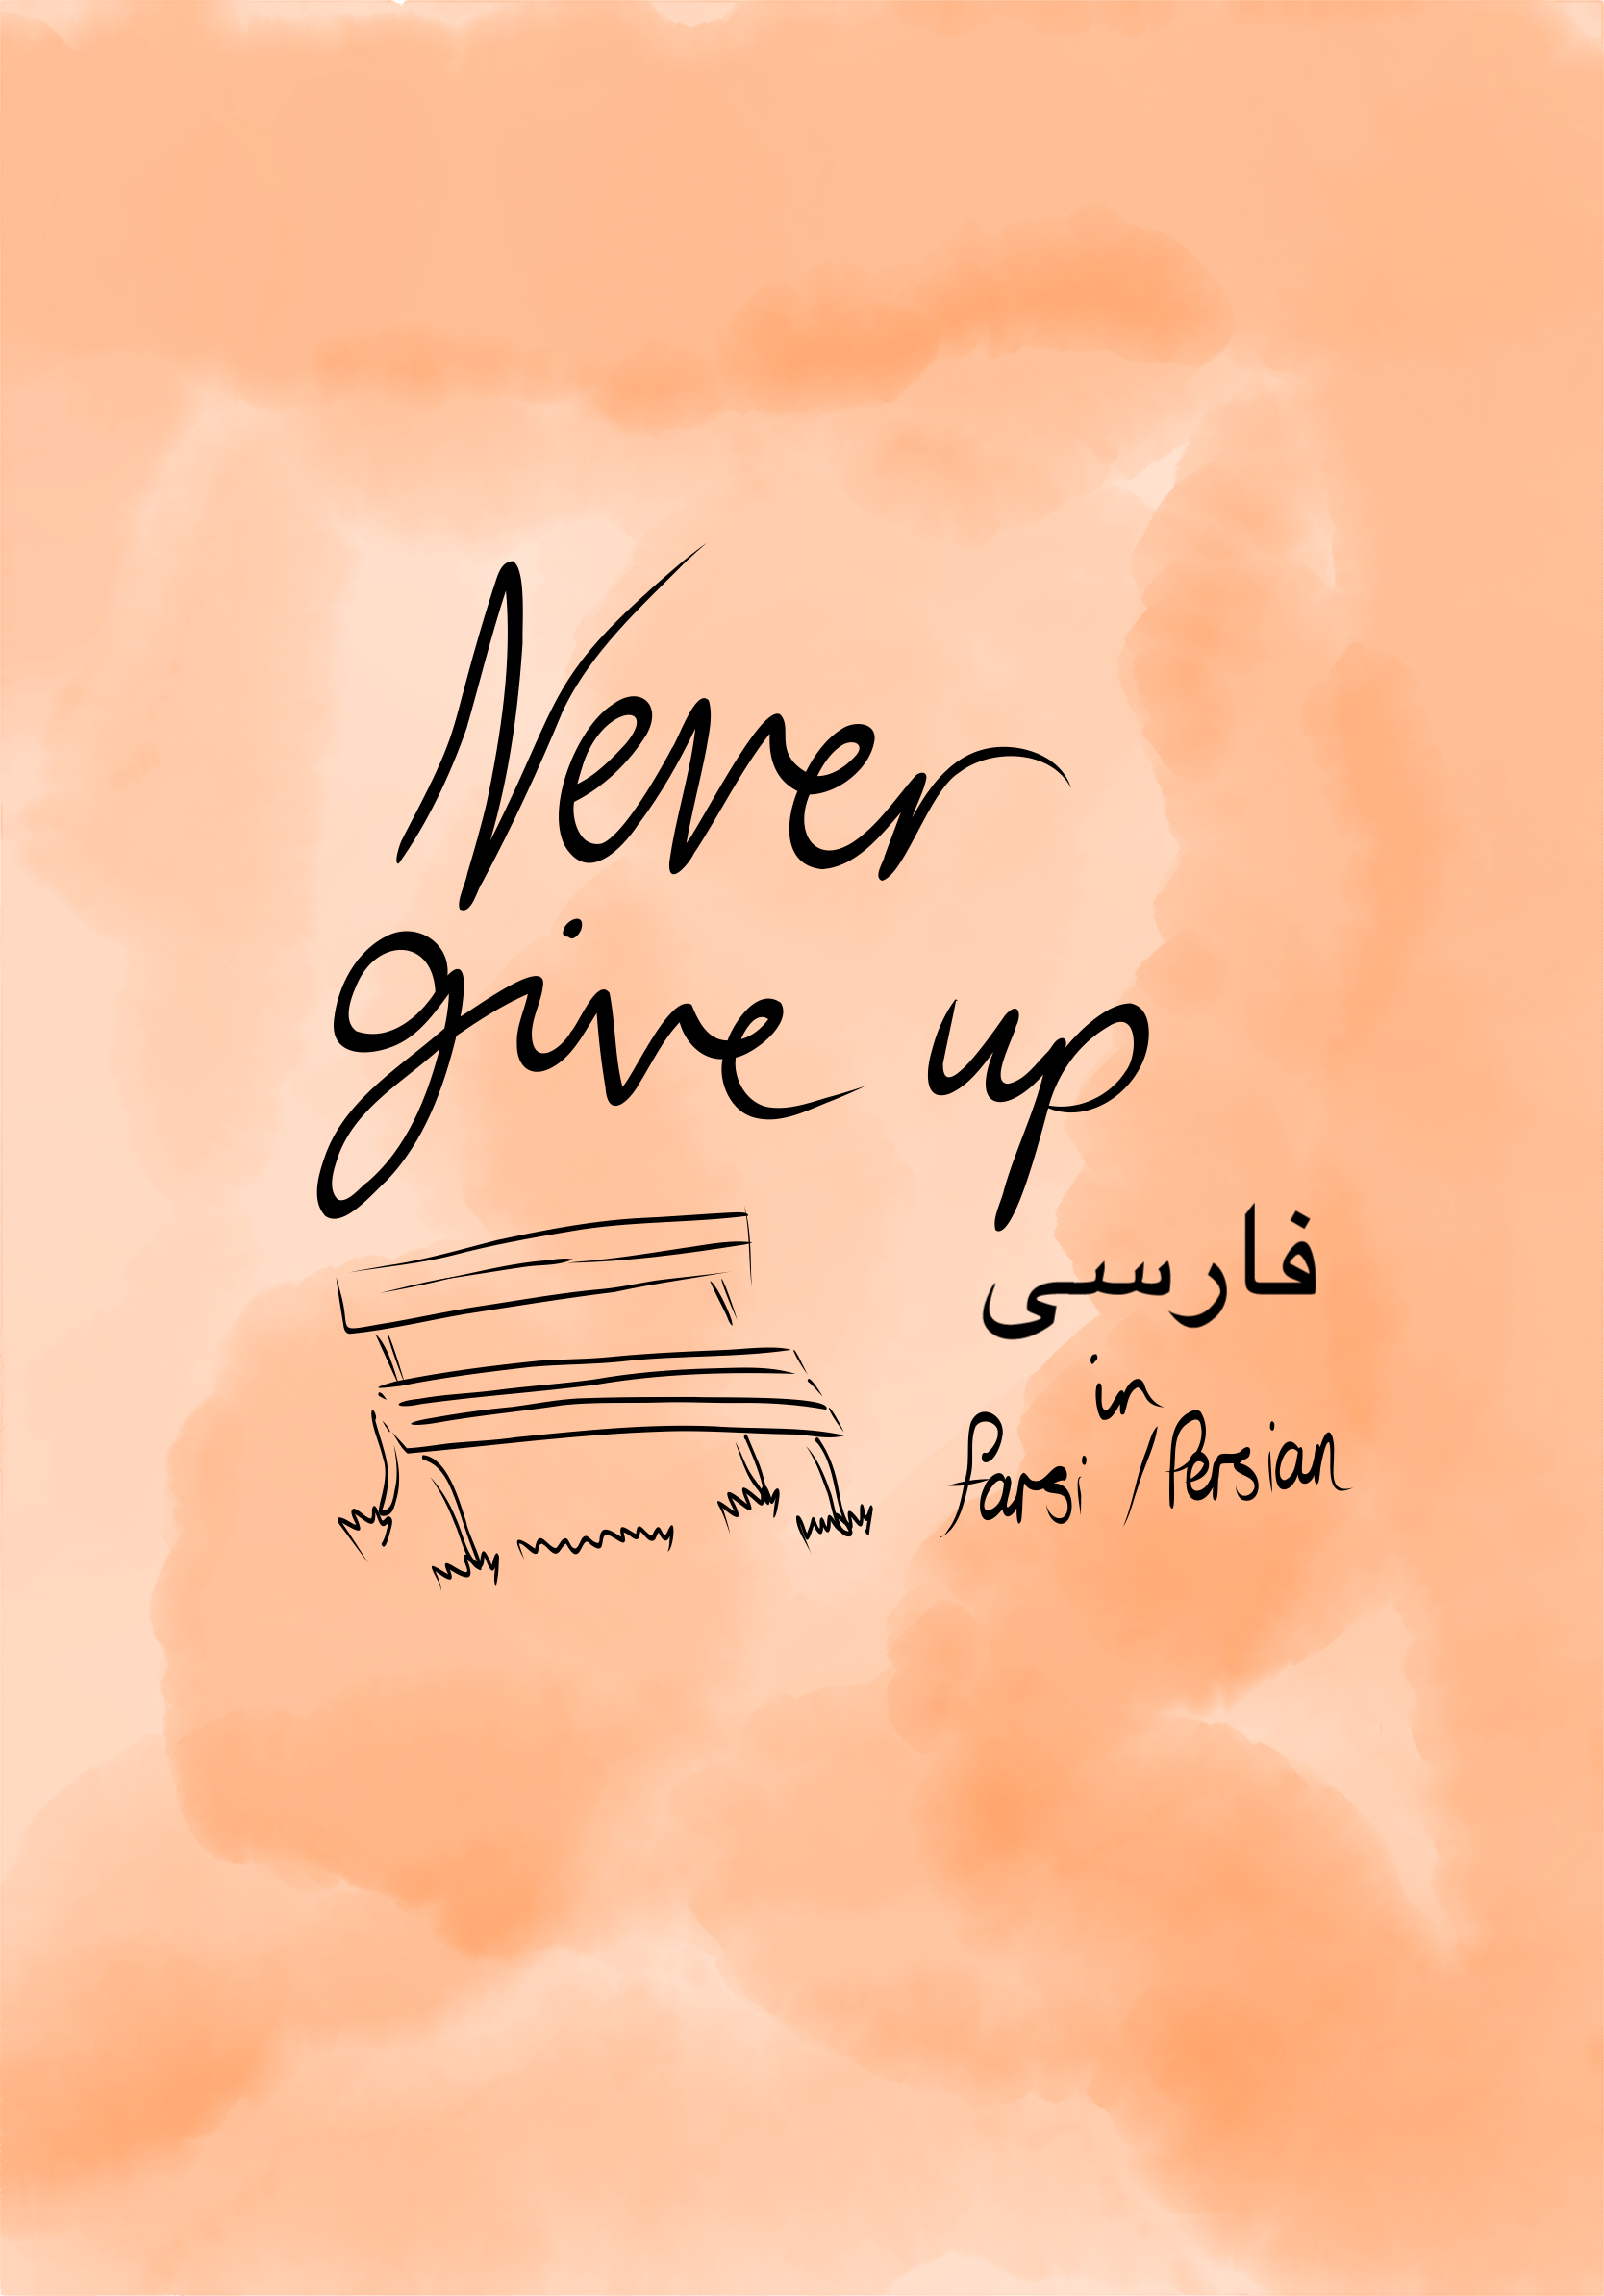 Never Give Up by Riaz